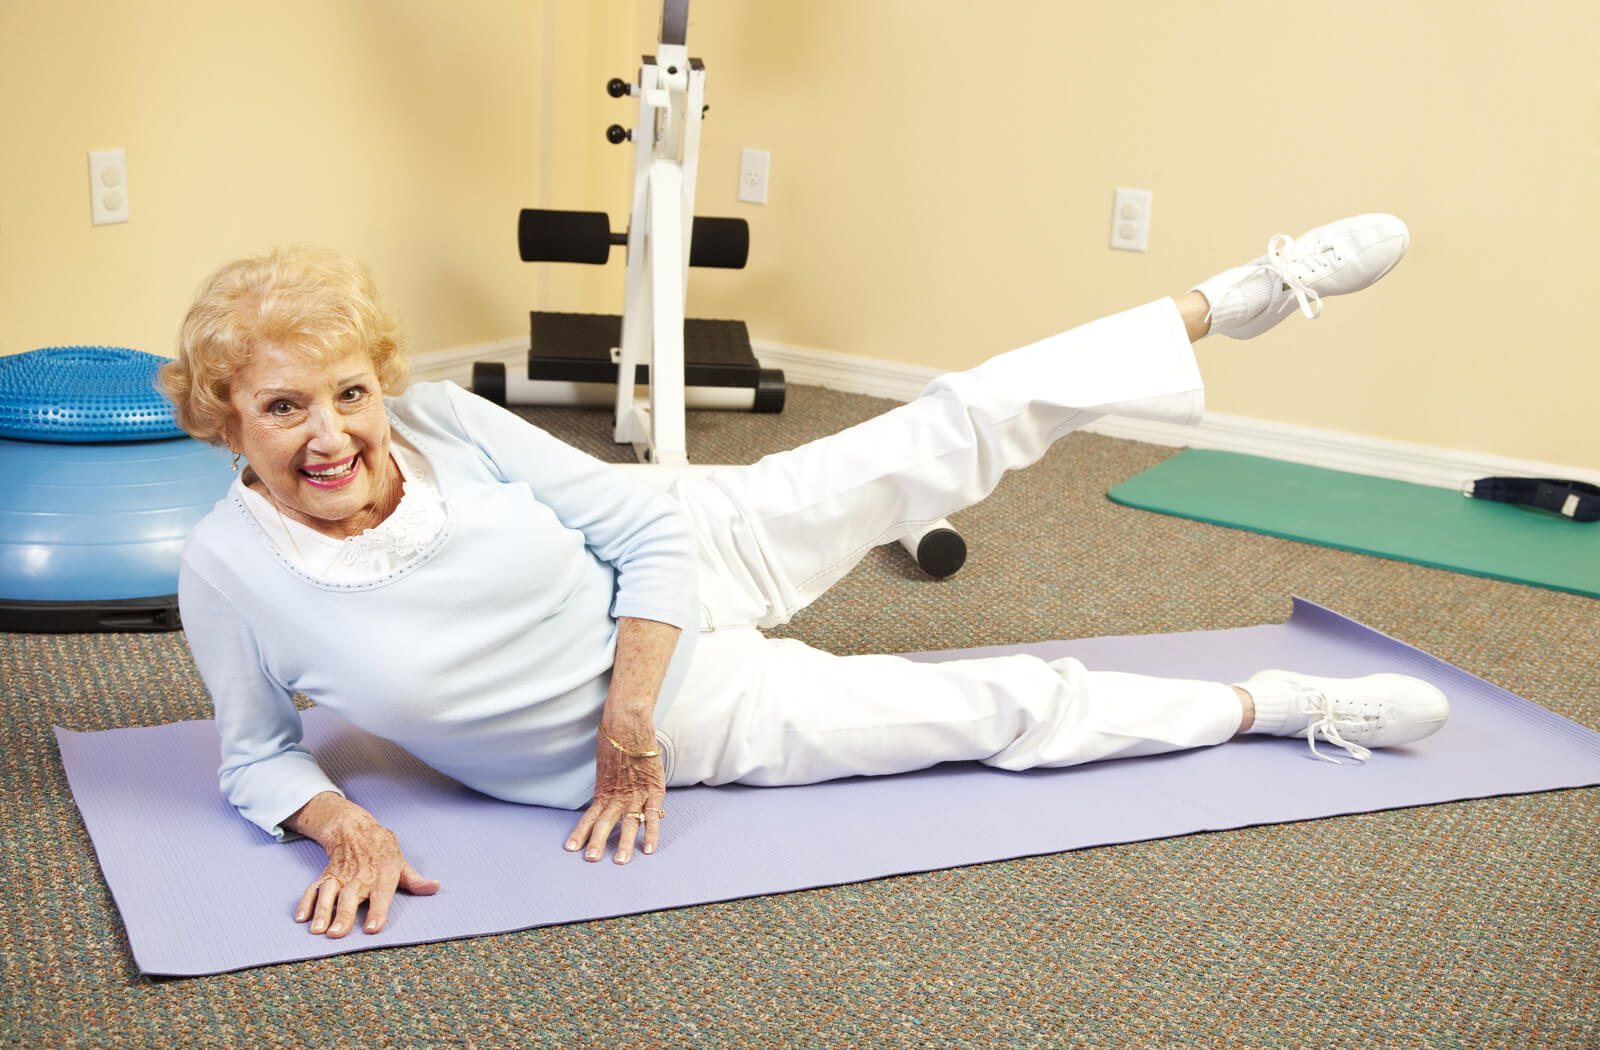 a senior woman lying on her side on a yoga mat performs a prone leg raise with her left leg while smiling at the camera